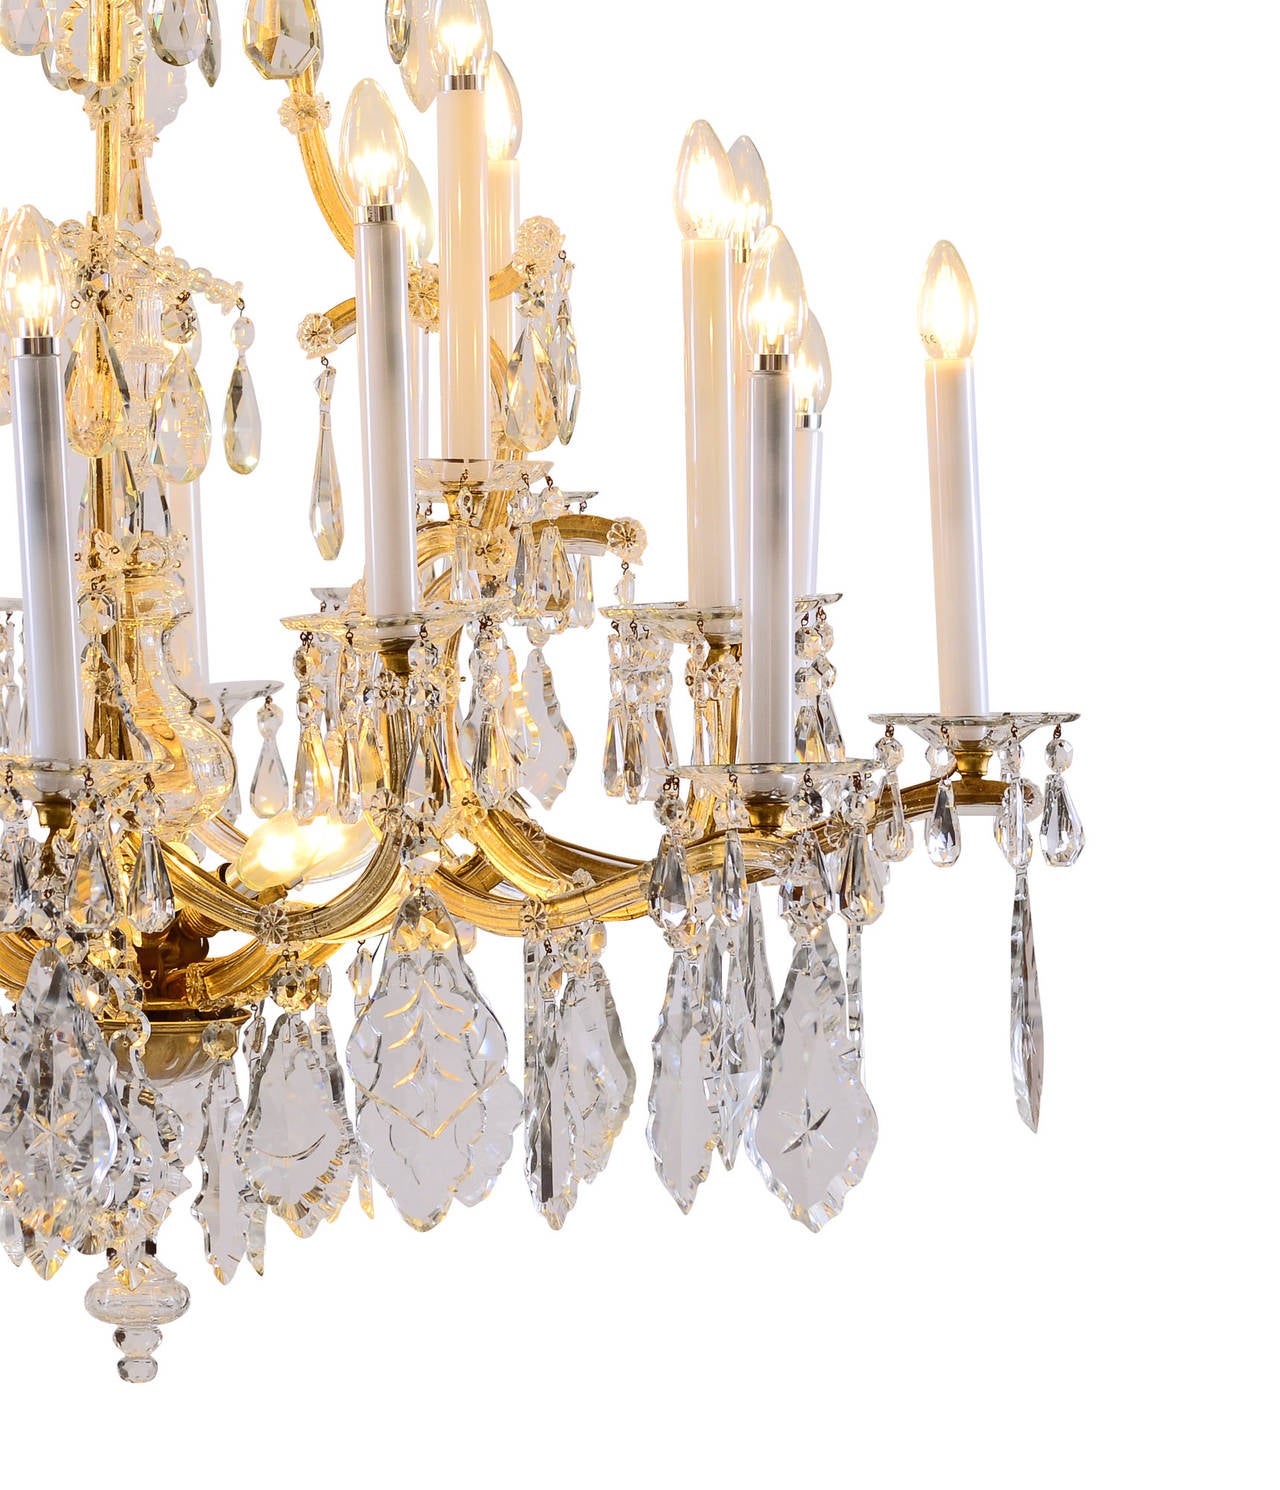 Very large Maria Theresa chandelier with 28 candles material metal frame with baluster decoration in the center, richly decorated with glass prism.
 